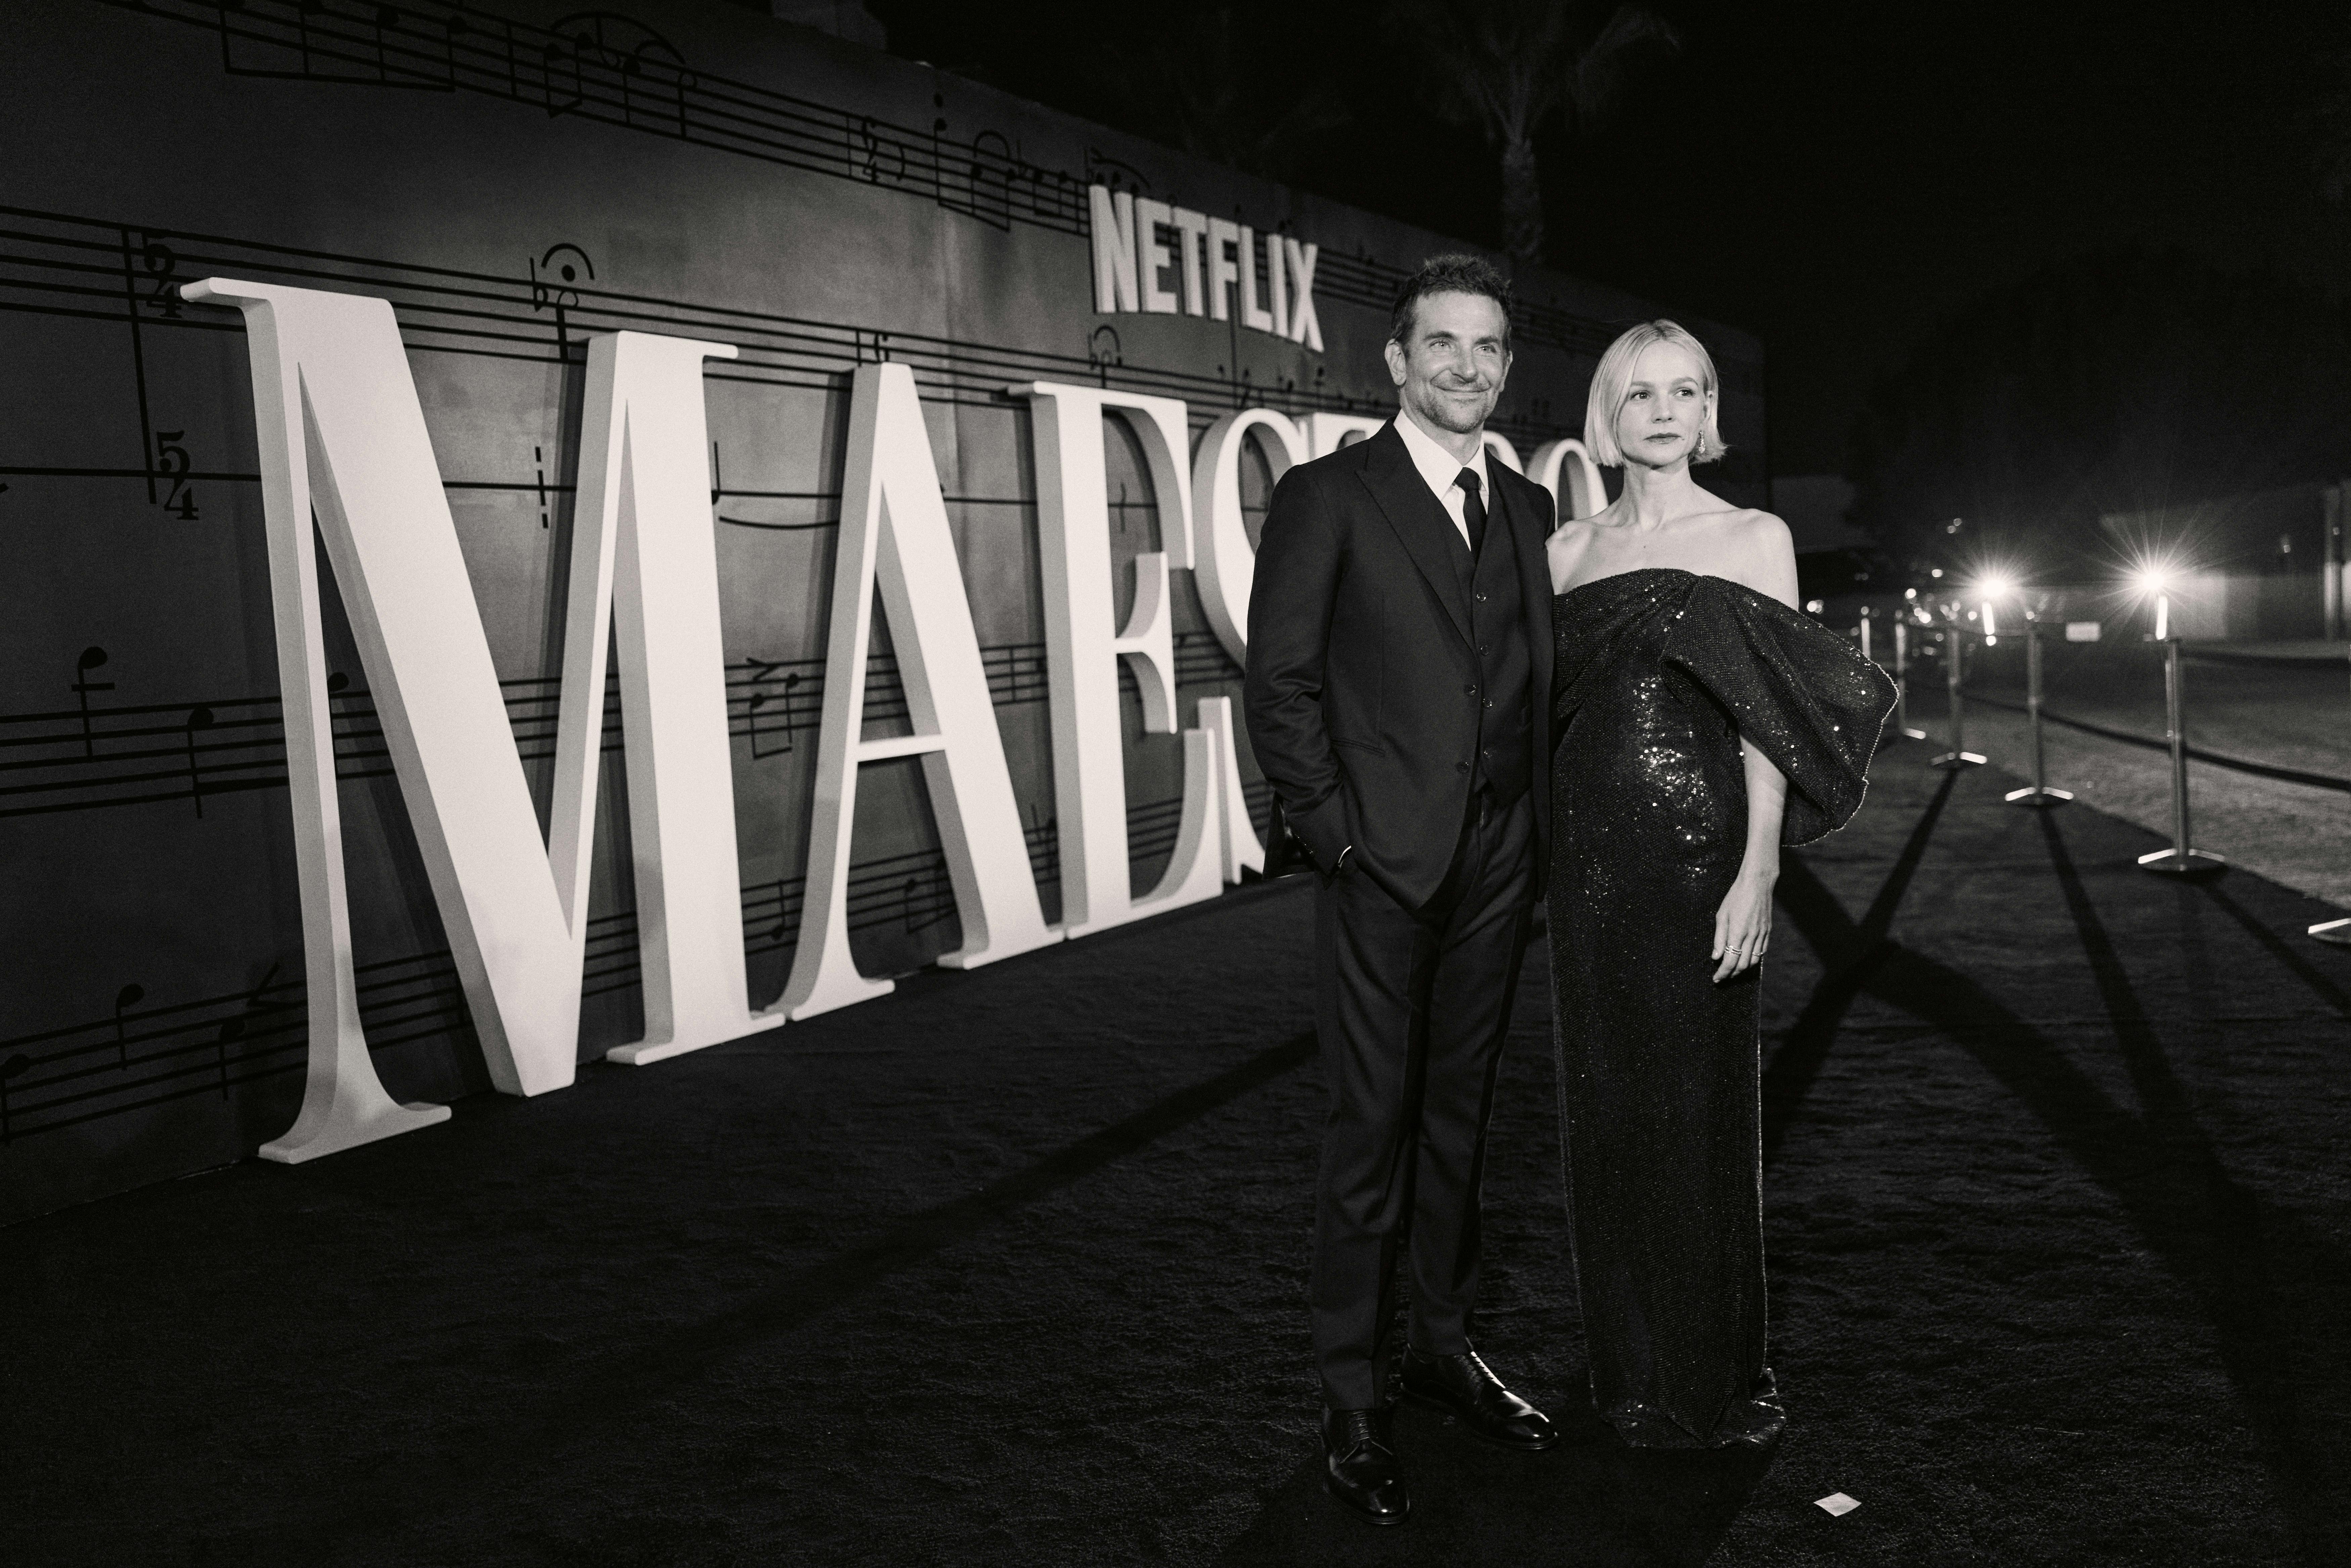 Bradley Cooper and Carey Mulligan stand on a black carpet next to 'MAESTRO' in white letters.